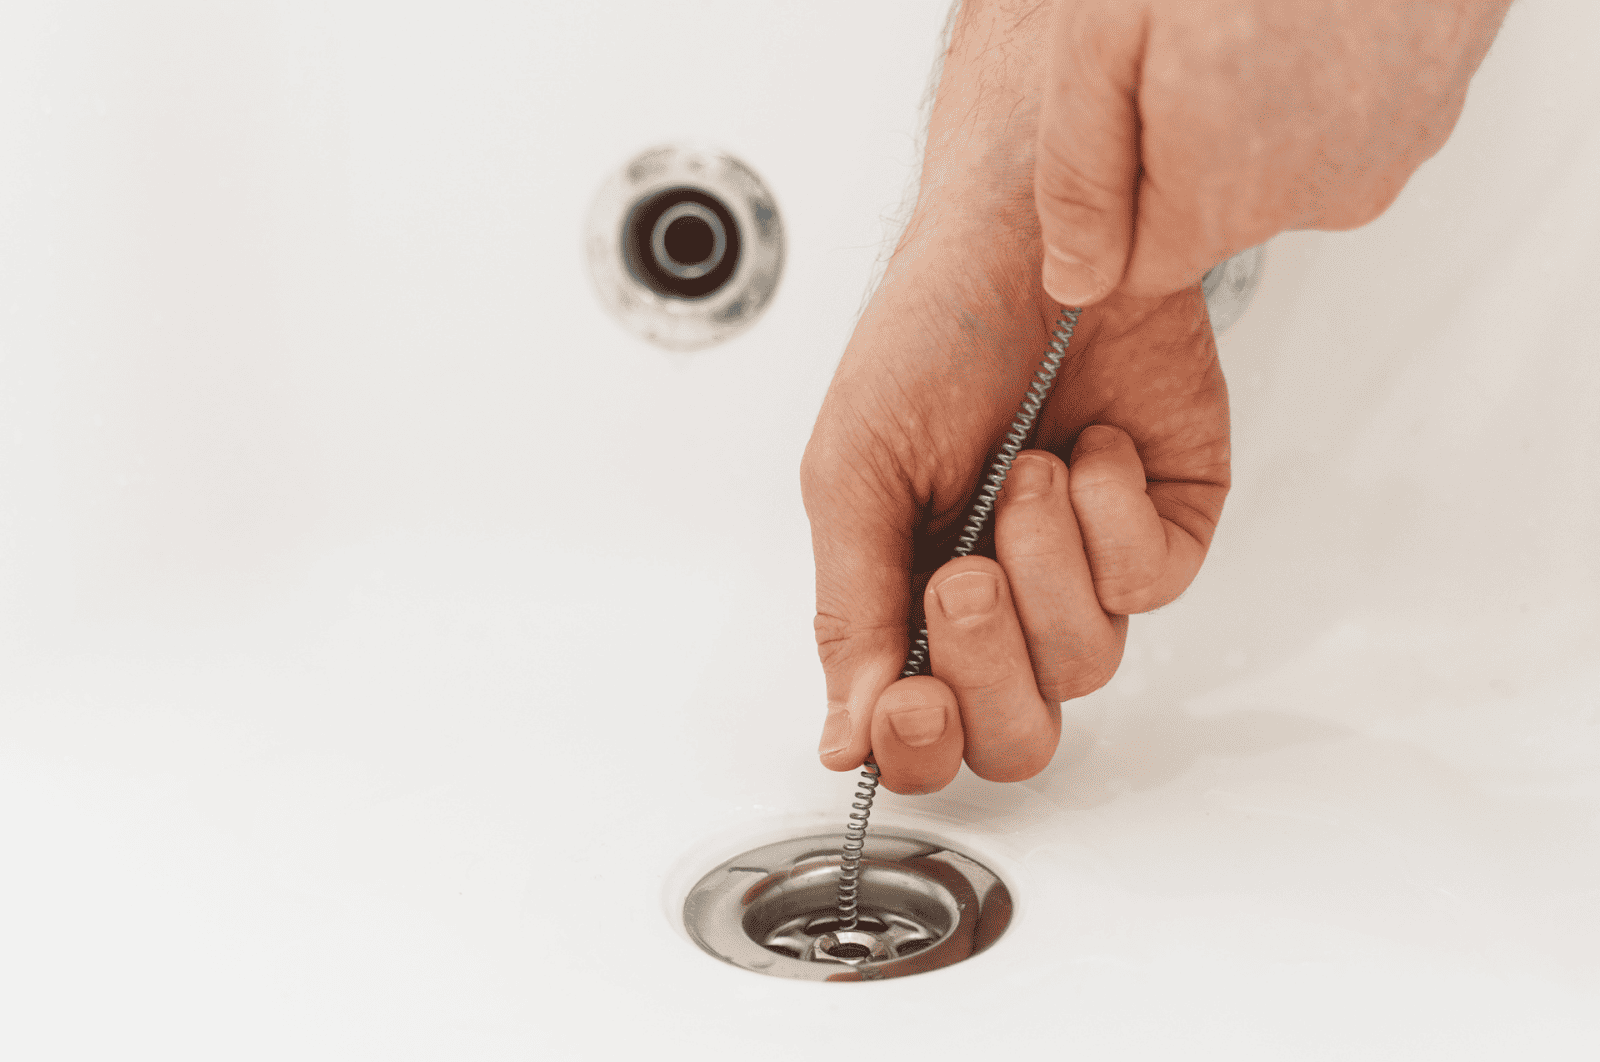 A person using a drain snake to unclog a sink drain